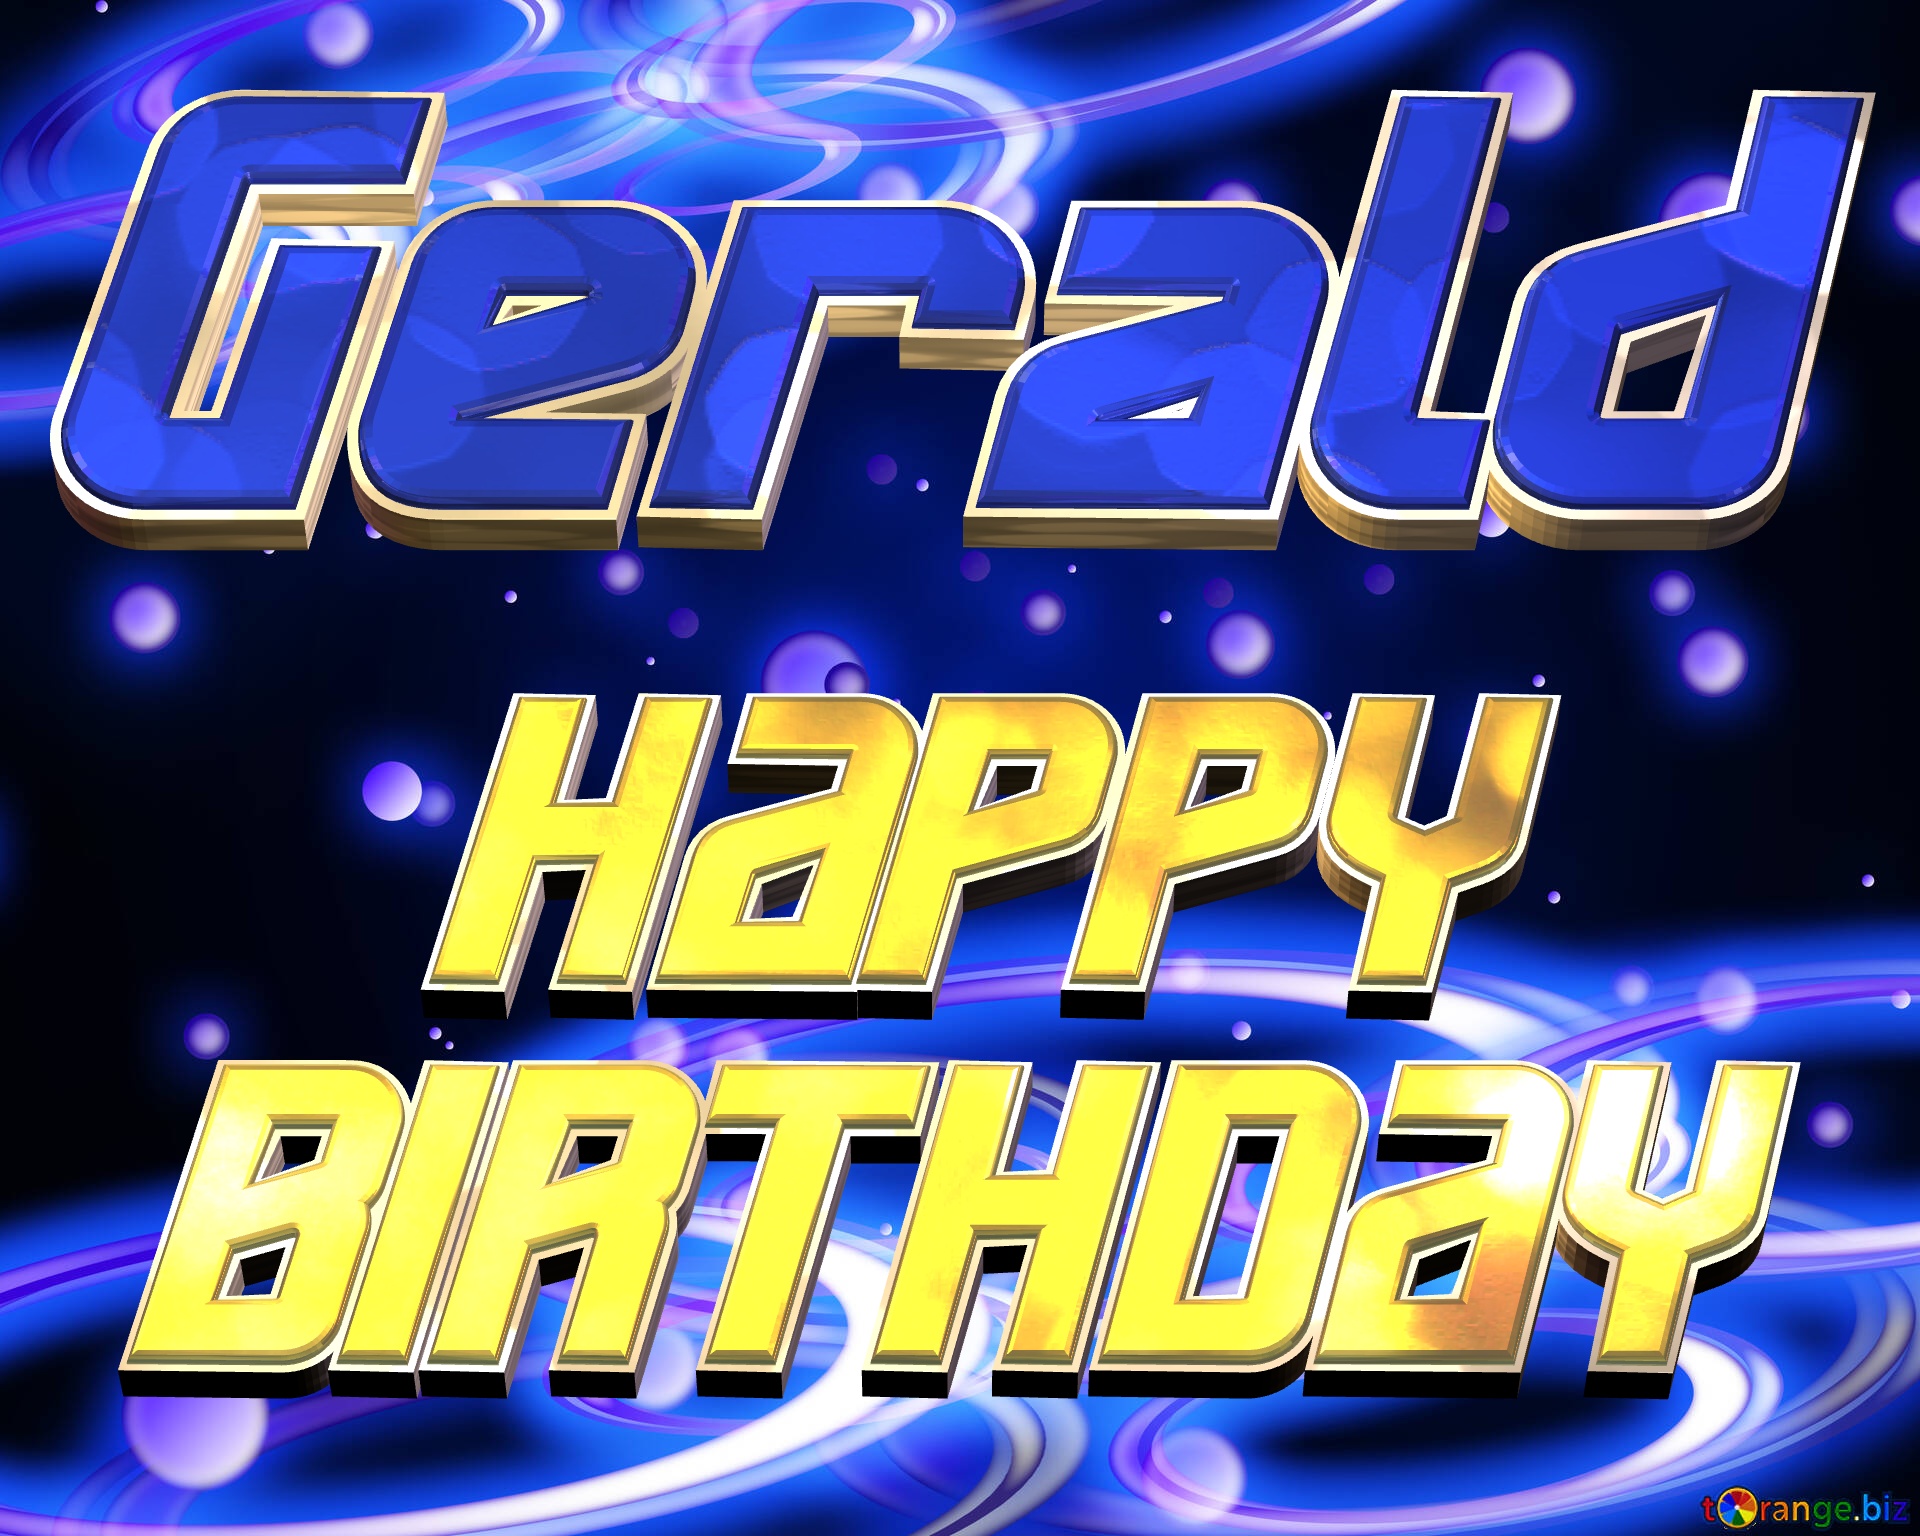 Gerald Space Happy Birthday! Technology background №54919